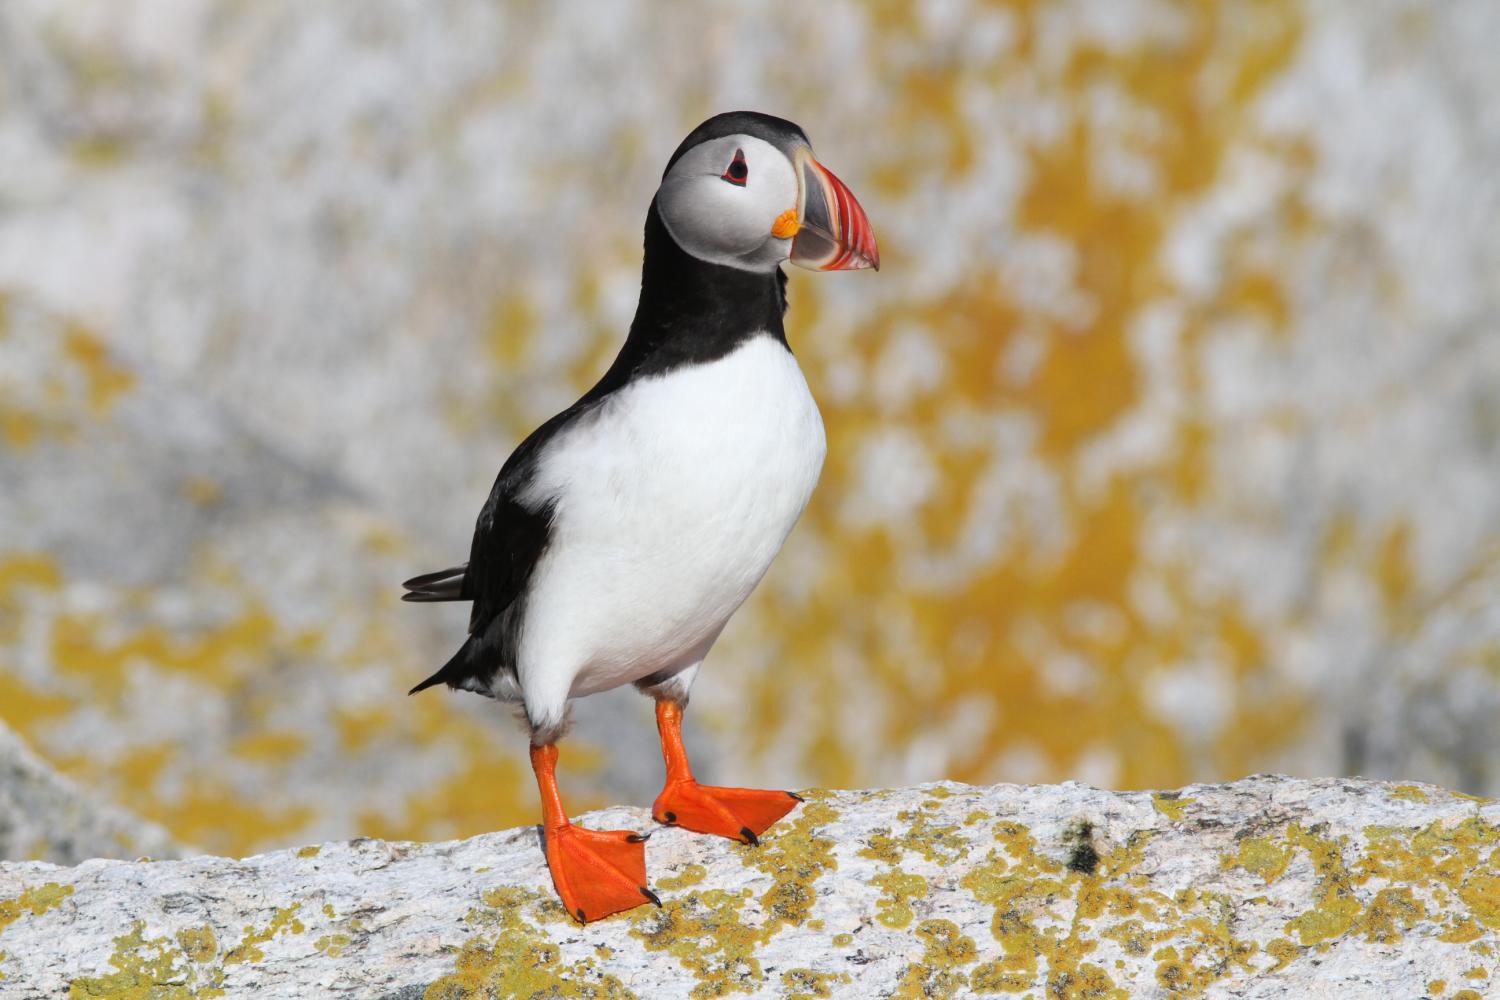 An Atlantic Puffin perched on a rock.